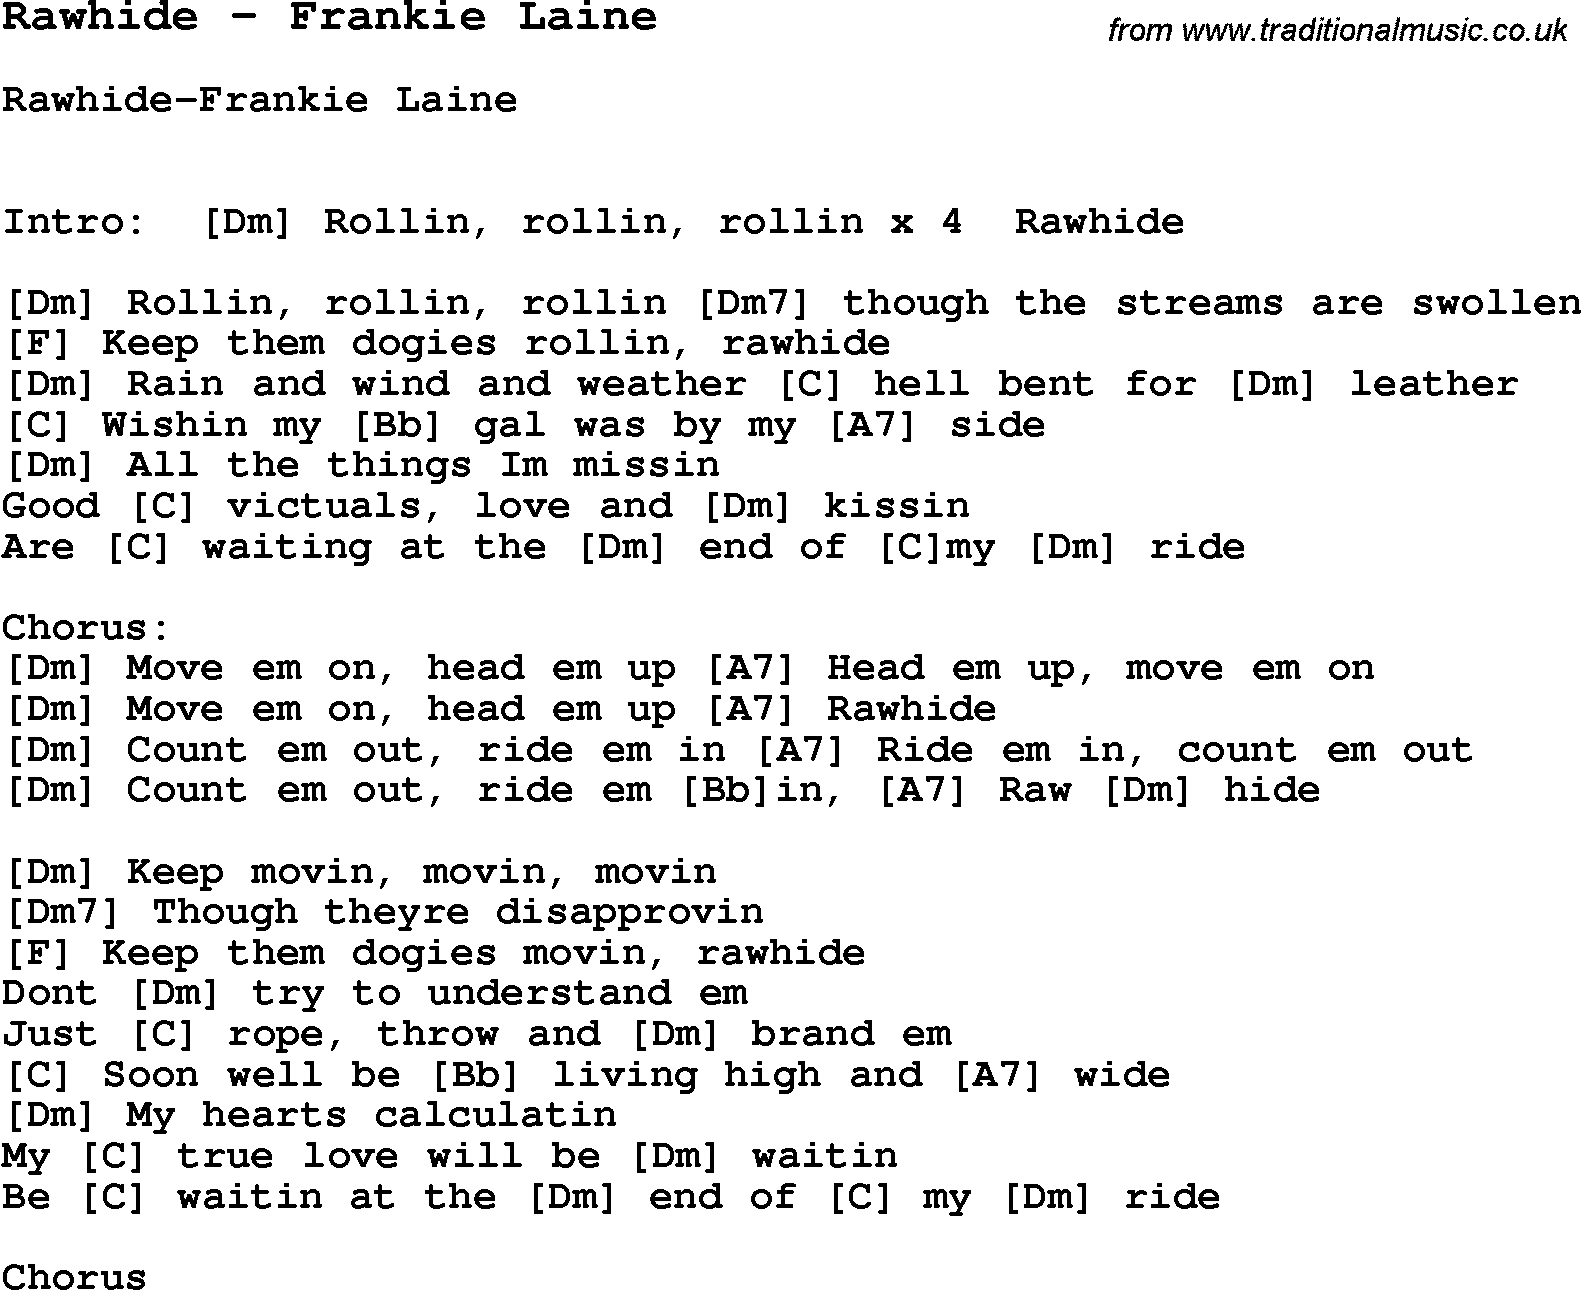 Song Rawhide by Frankie Laine, with lyrics for vocal performance and accompaniment chords for Ukulele, Guitar Banjo etc.